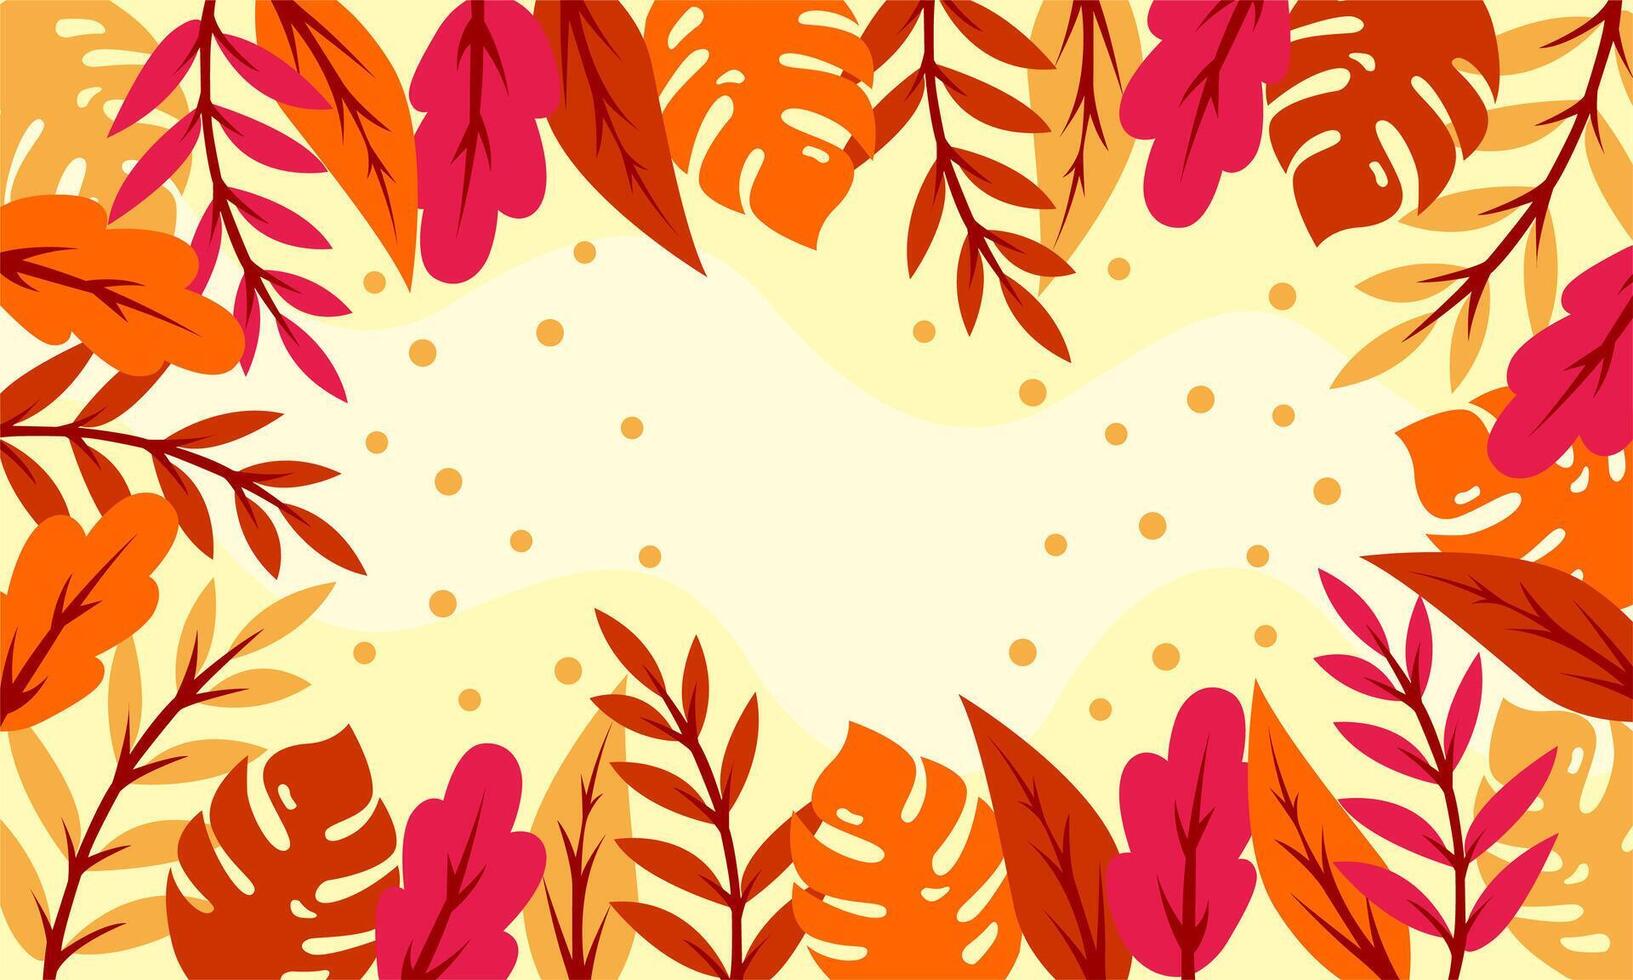 Flat abstract floral leaves background vector